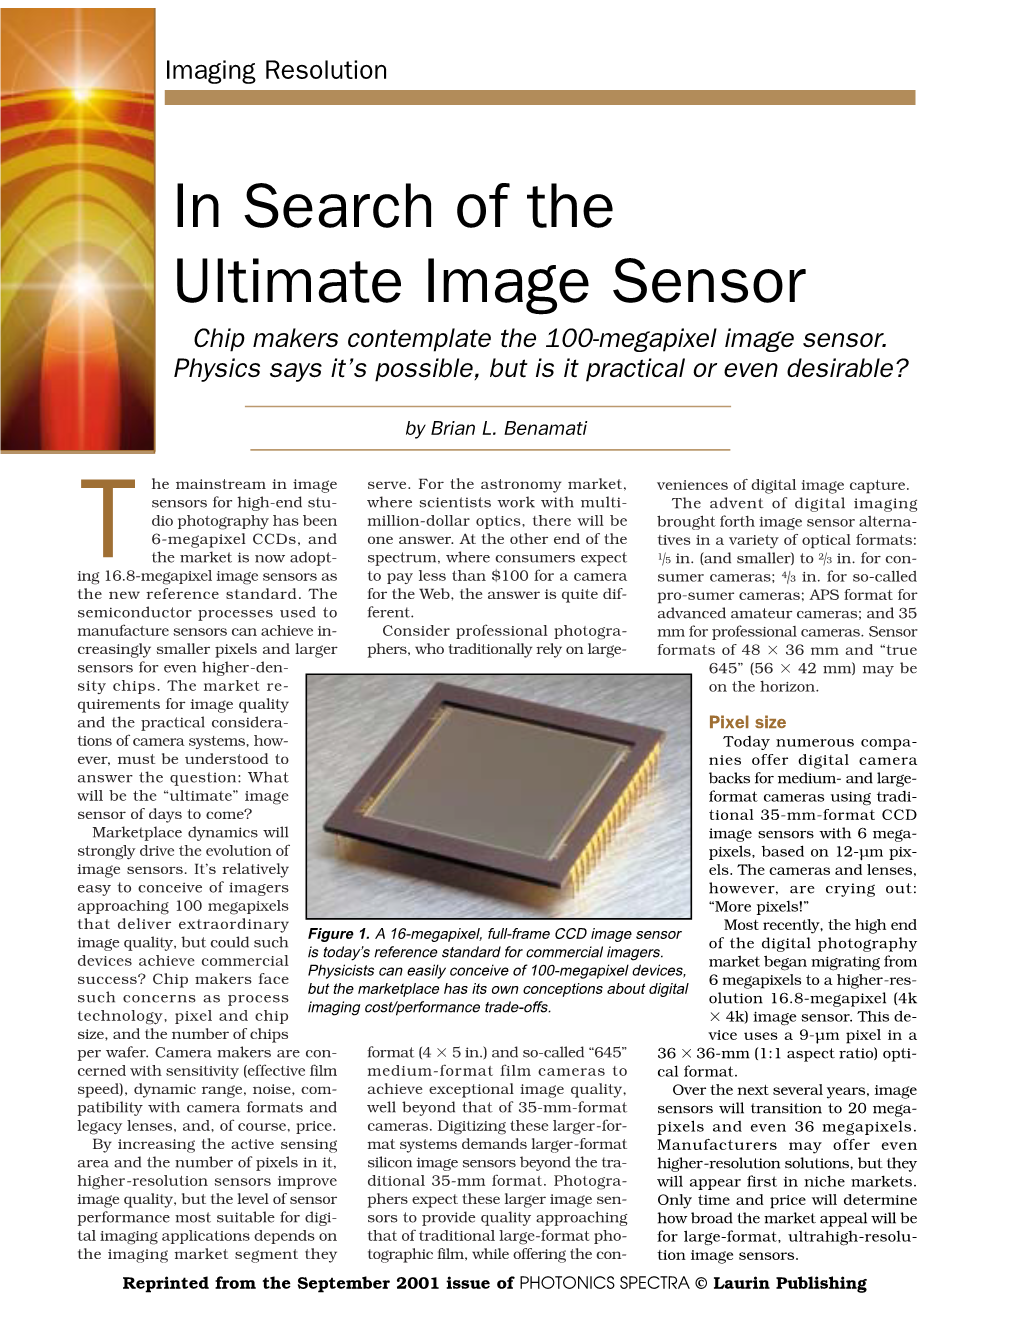 In Search of the Ultimate Image Sensor Chip Makers Contemplate the 100-Megapixel Image Sensor